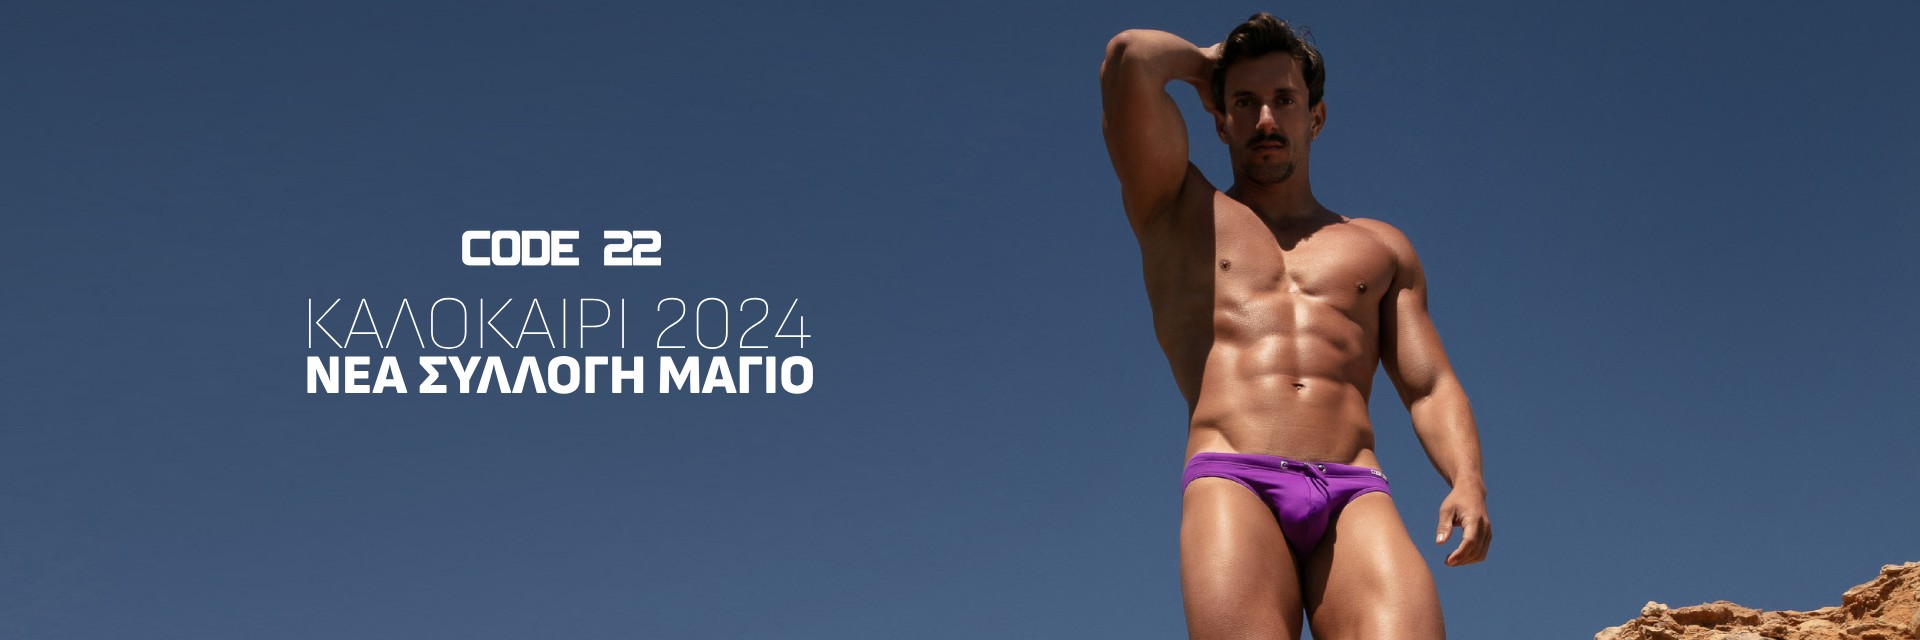 2024 CODE 22 new swimwear collection GR